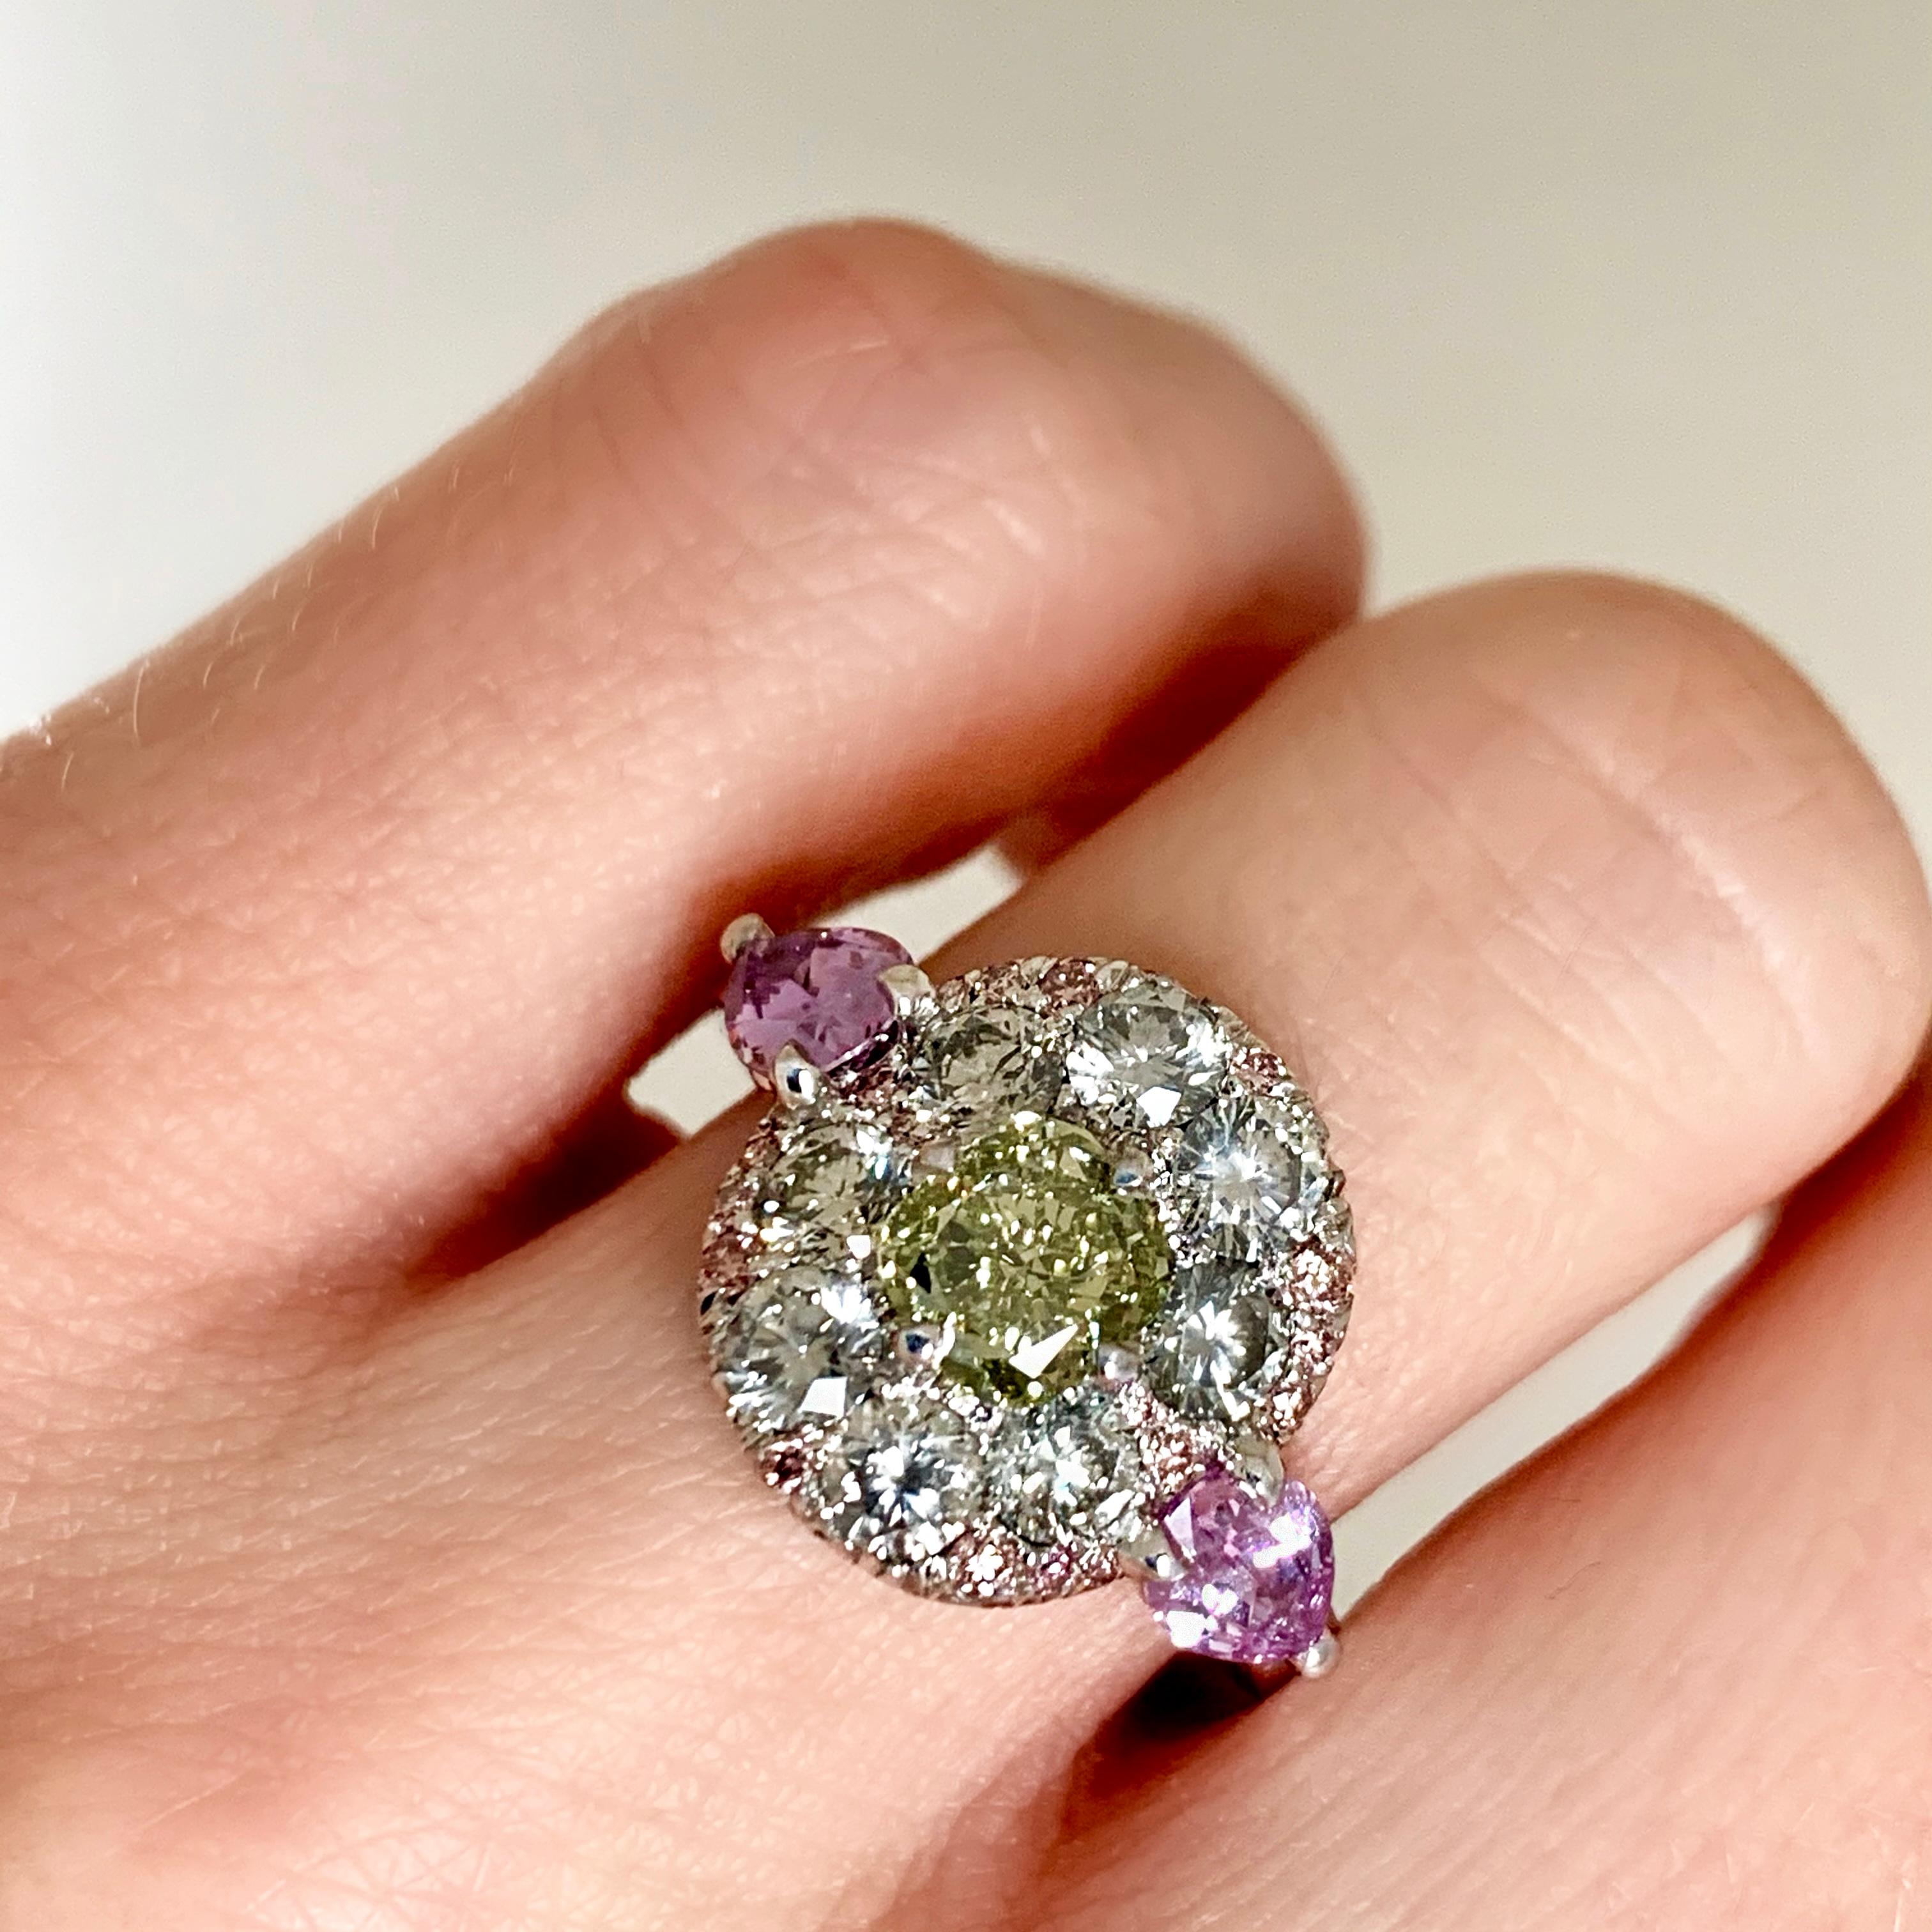 1.02 Carat Fancy Green, Grey, Pink Diamond, Unheated Violet Sapphire Pave Ring 7